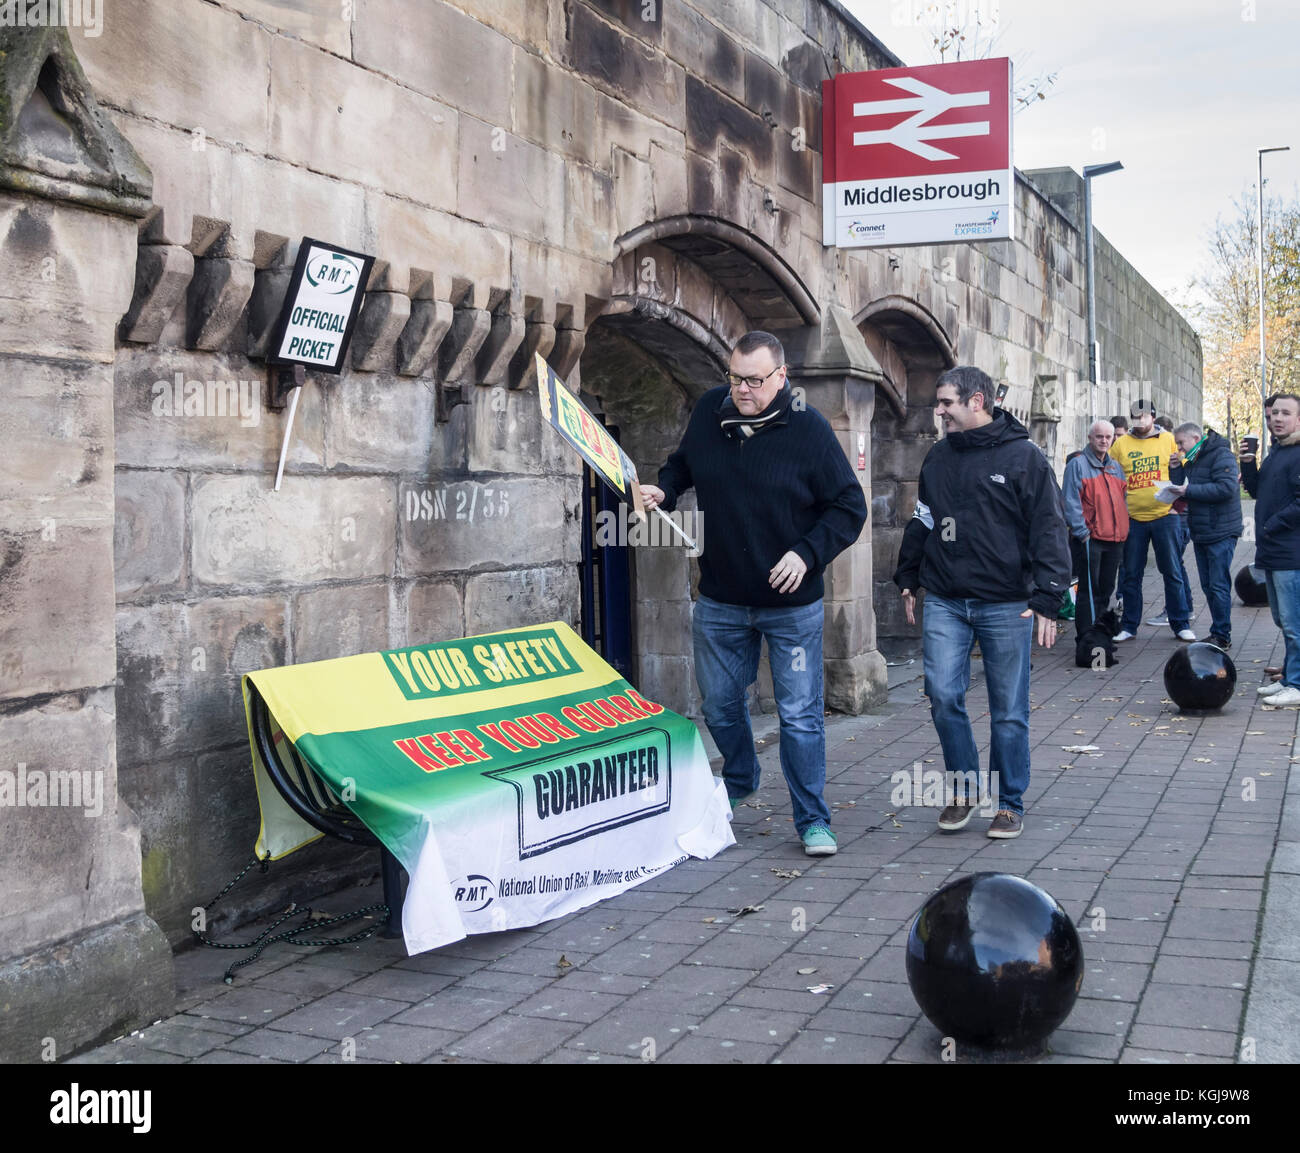 Middlesbrough, UK. 8th Nov, 2017. RMT union official picket outside Middlesbrough station on Wednesday morning over staffing and proposed driver-only trains. A reduced service, operated by managers, will see Northern Line run a limited timetable on Wednesday. Credit: ALAN DAWSON/Alamy Live News Stock Photo